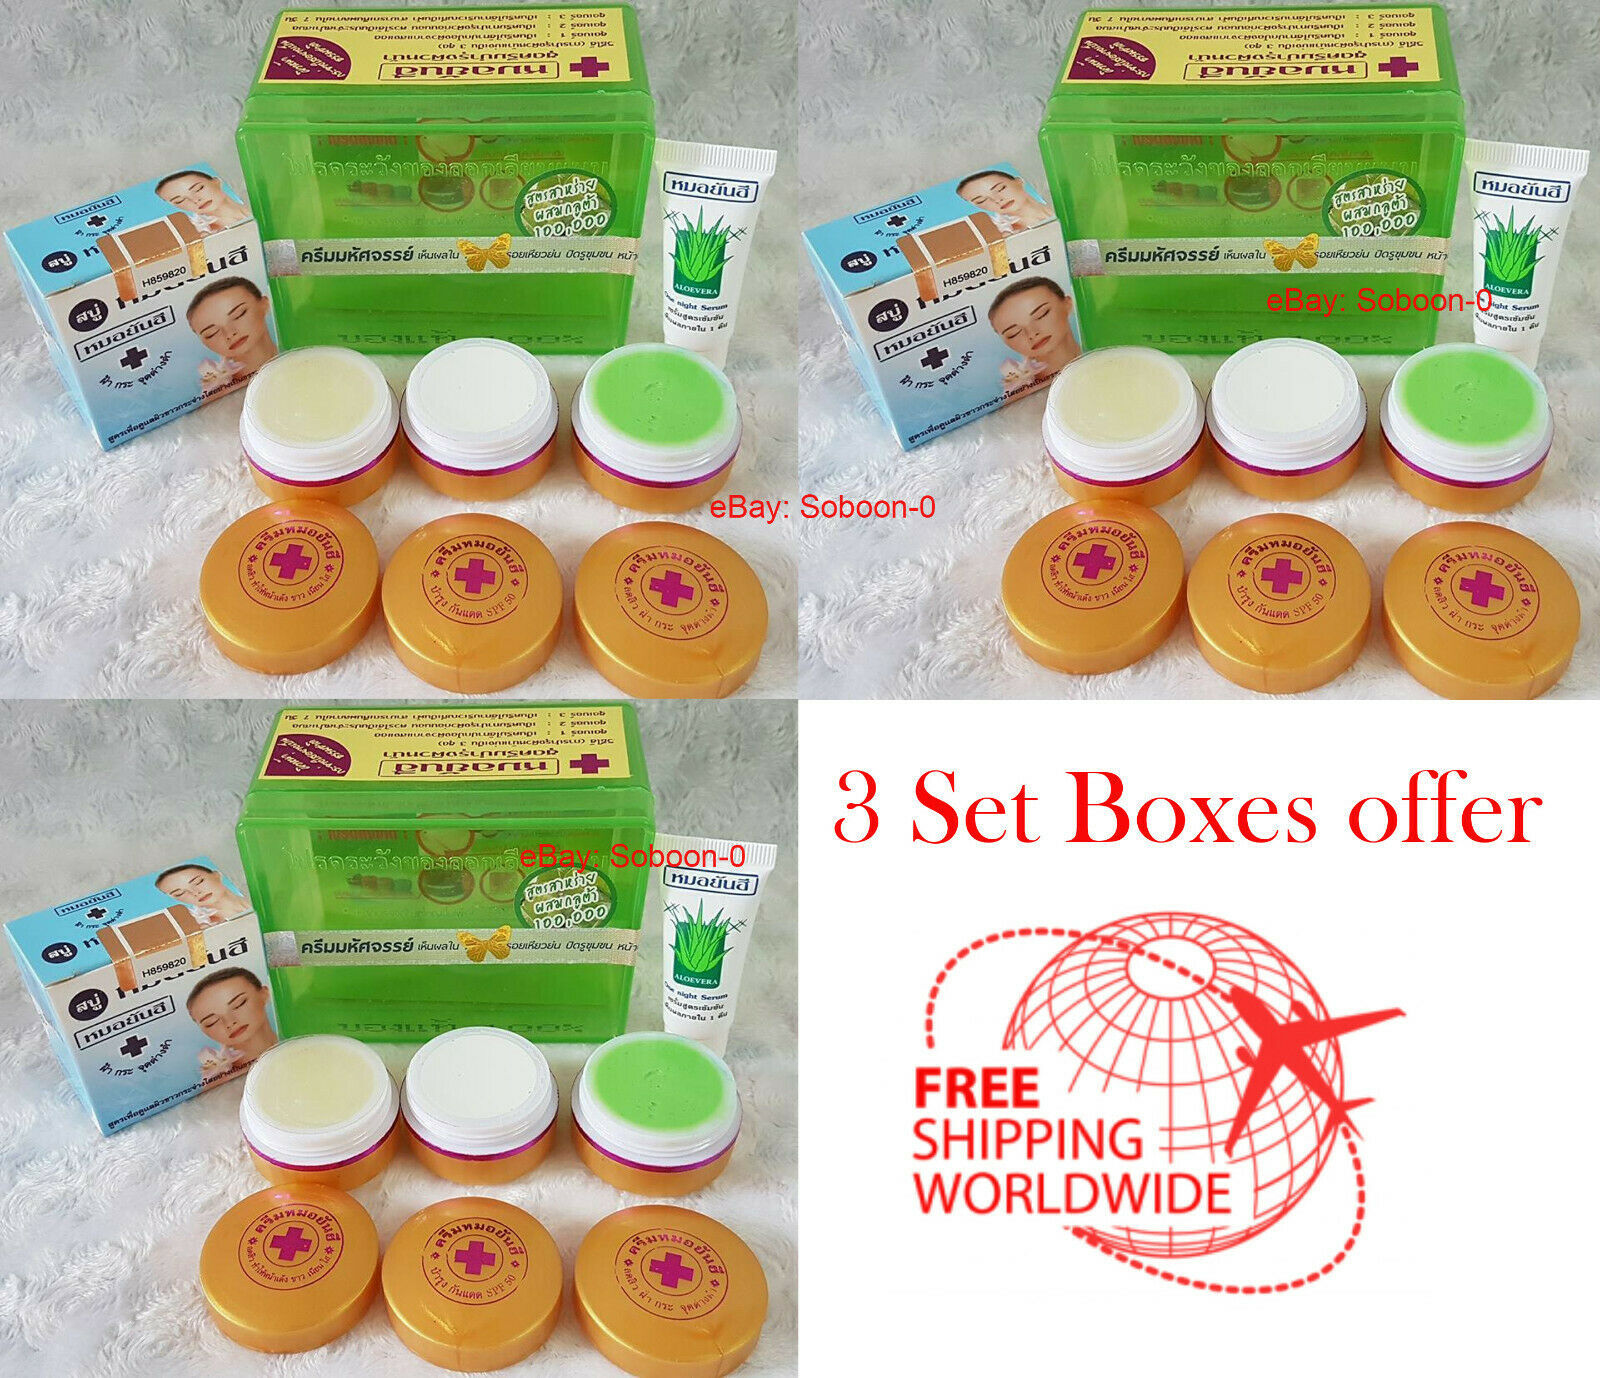 3 Boxes X Result in 14 Days. Dr. Yanhee Whitening Cream / Seaweed + Glutathione - $49.01